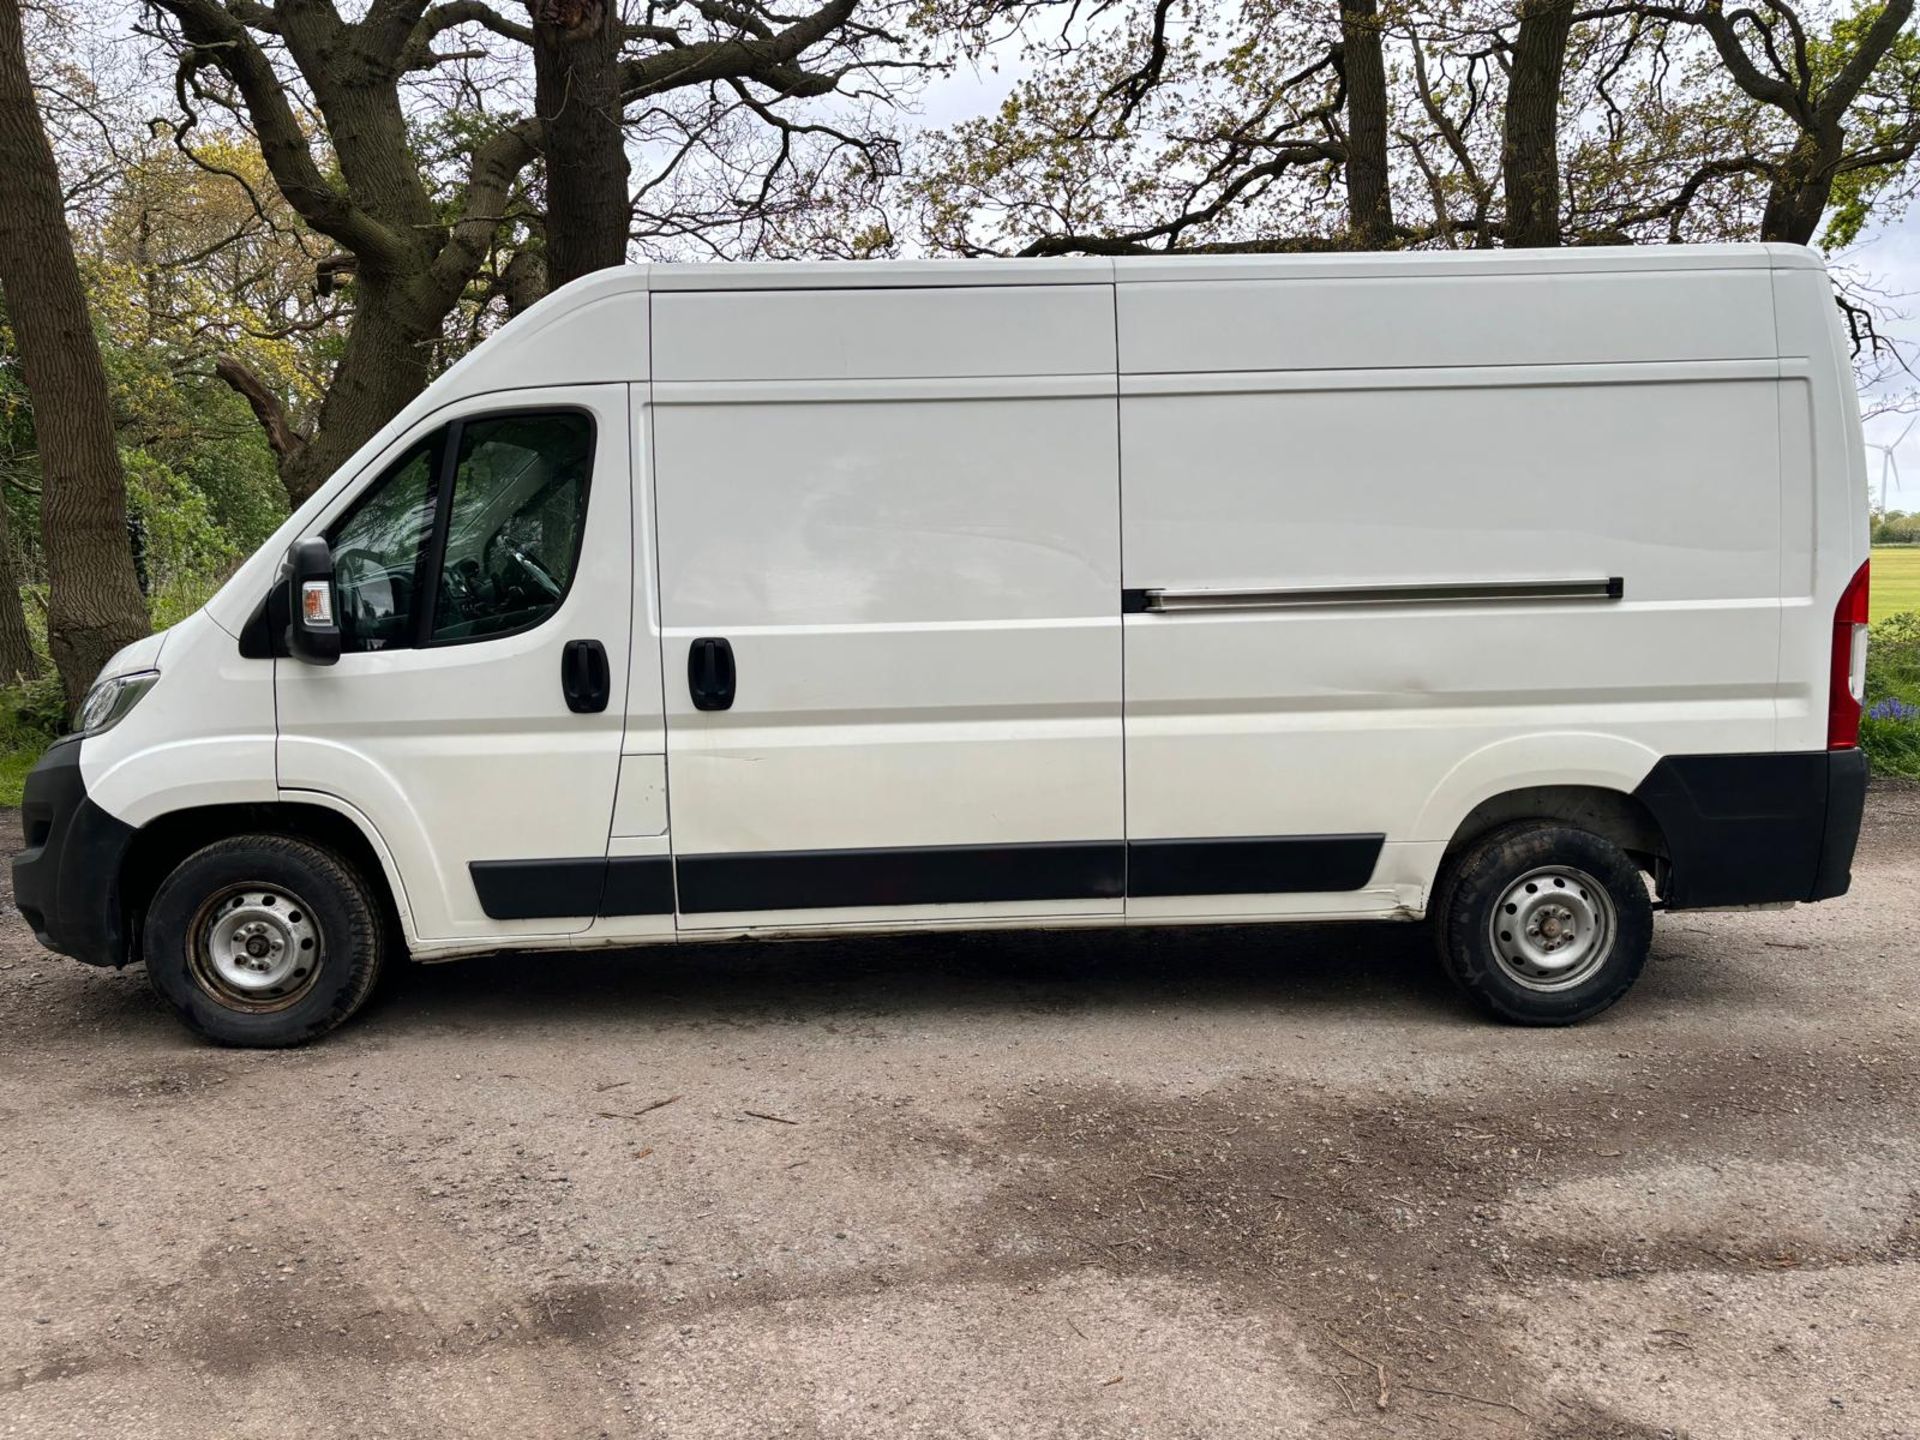 2020 20 CITROEN RELAY PANEL VAN - 2.2 6 SPEED - 109K MILES - AIR CON - EURO 6 - PLY LINED  - Image 4 of 12